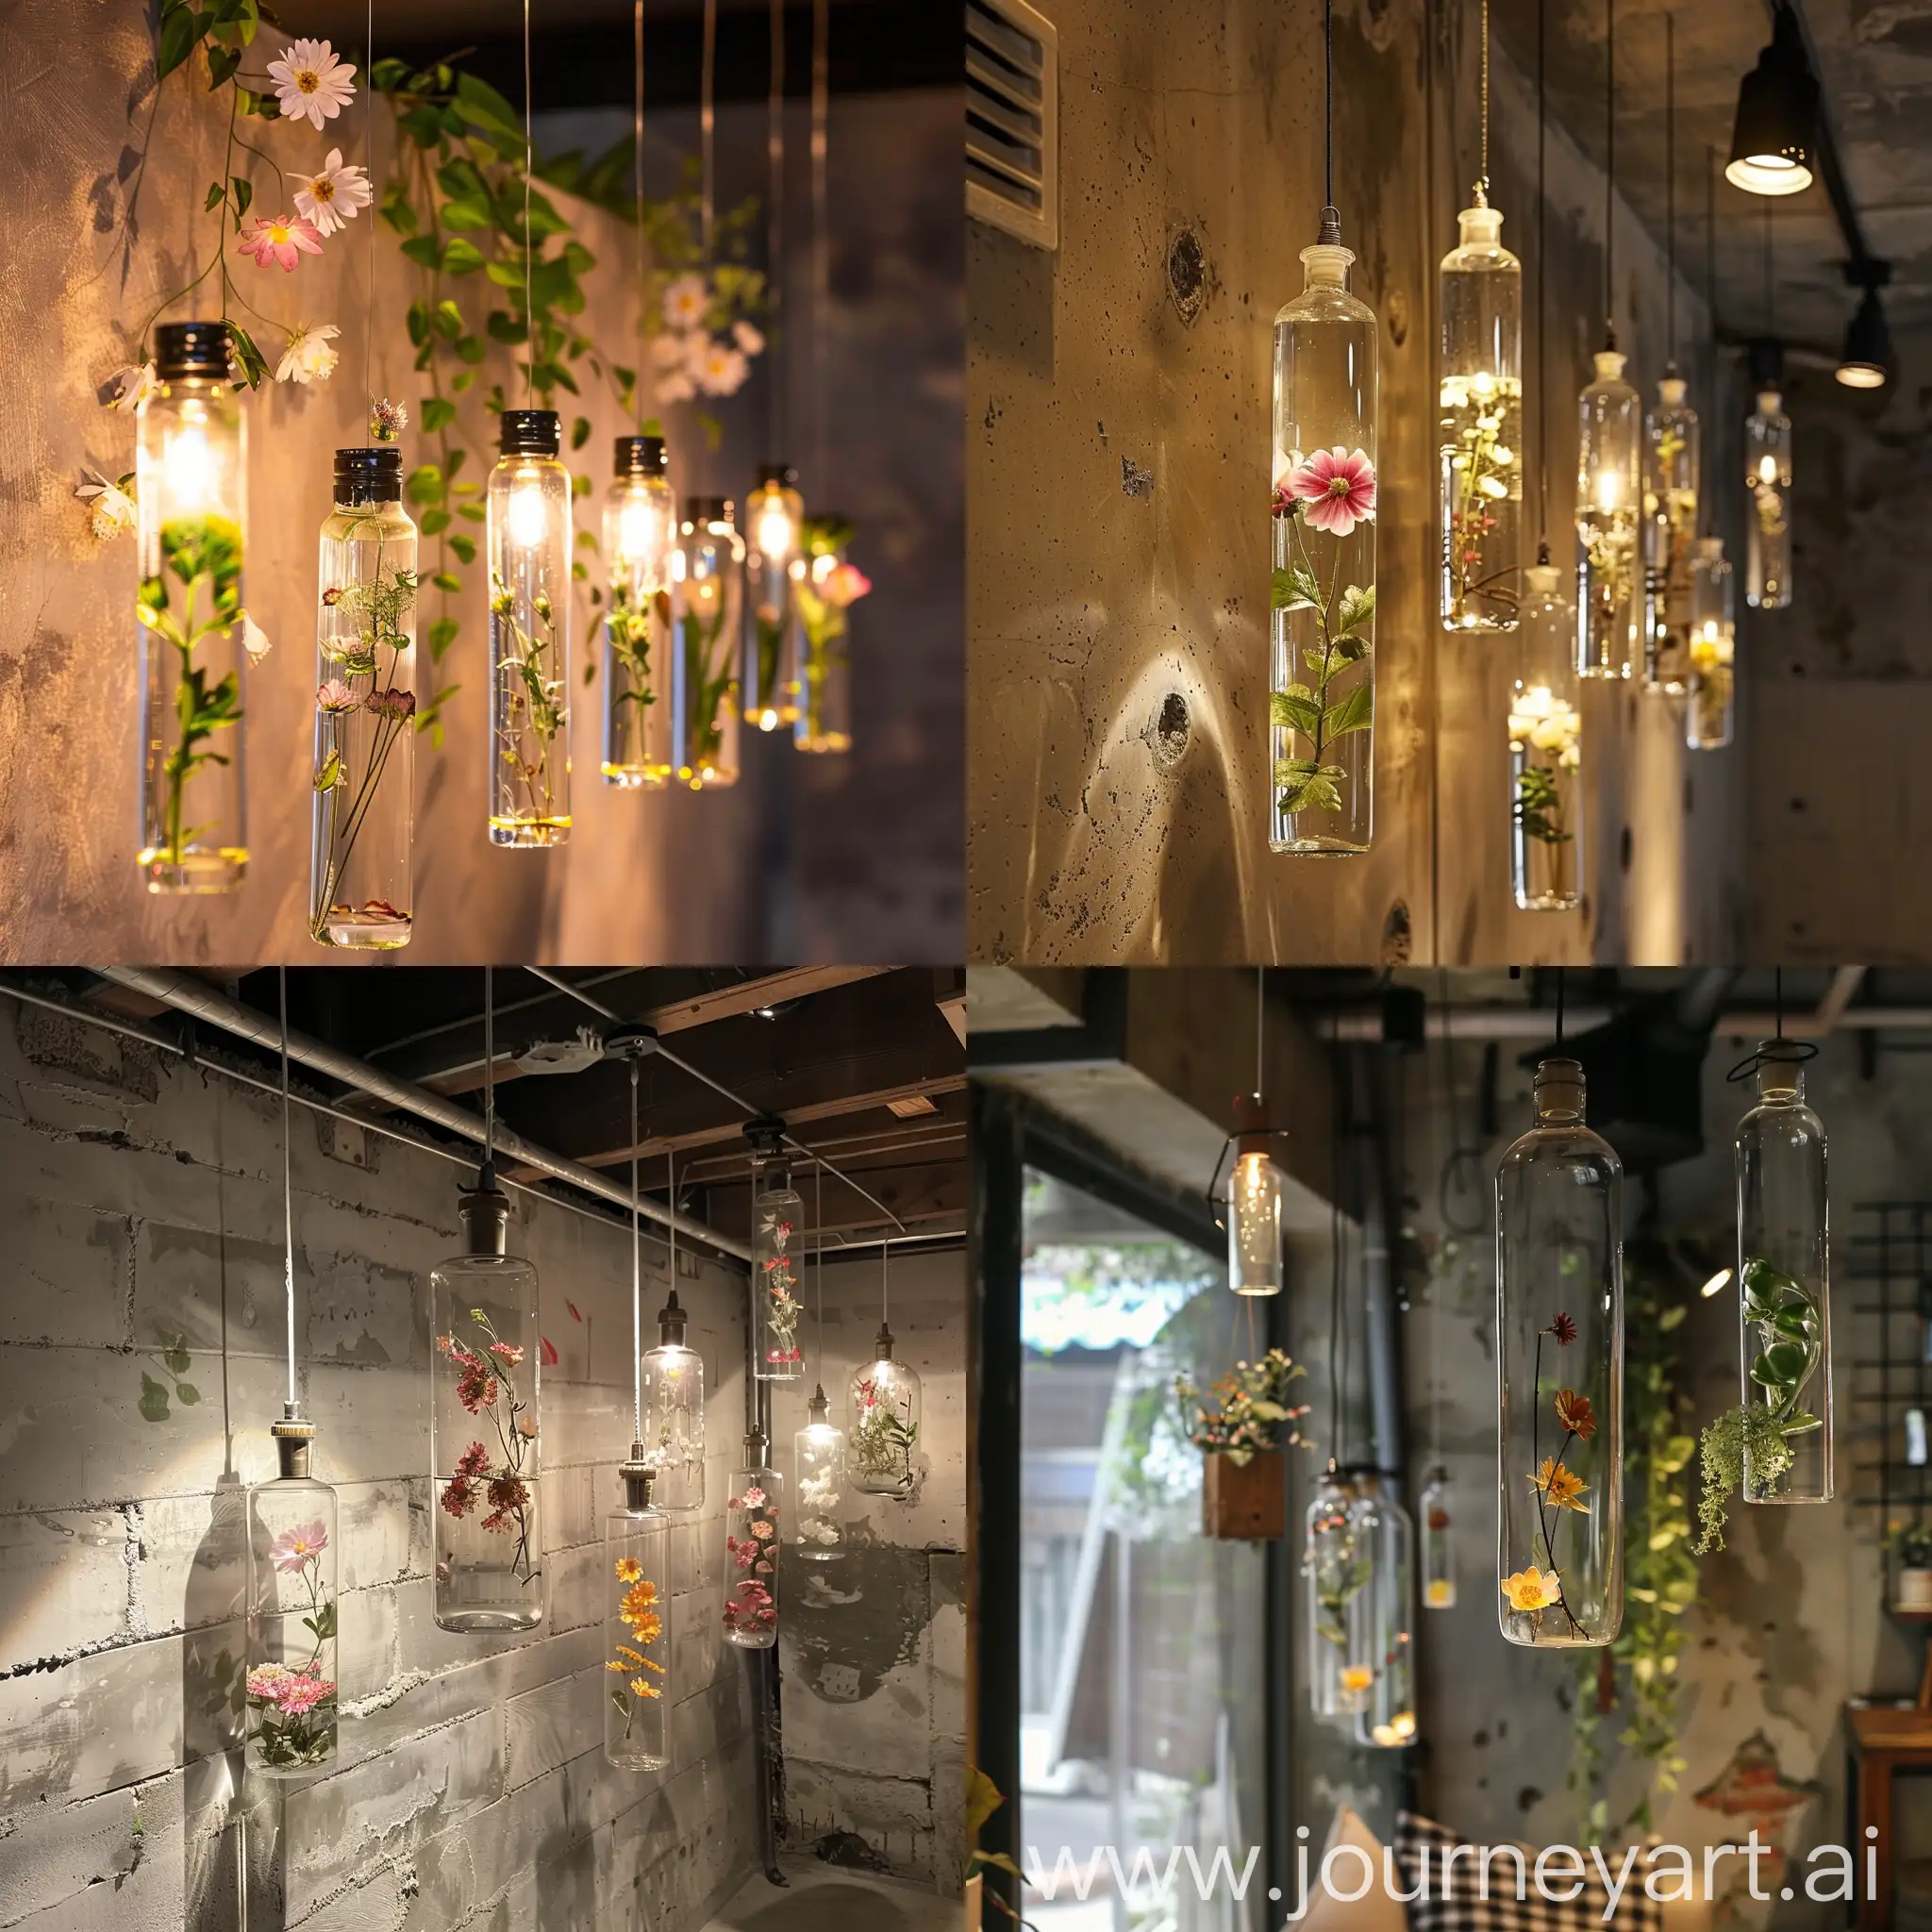 decor on the walls of the basement using hanging transparent glass bottles of flowers and water. or hanging other decor associated with daytime